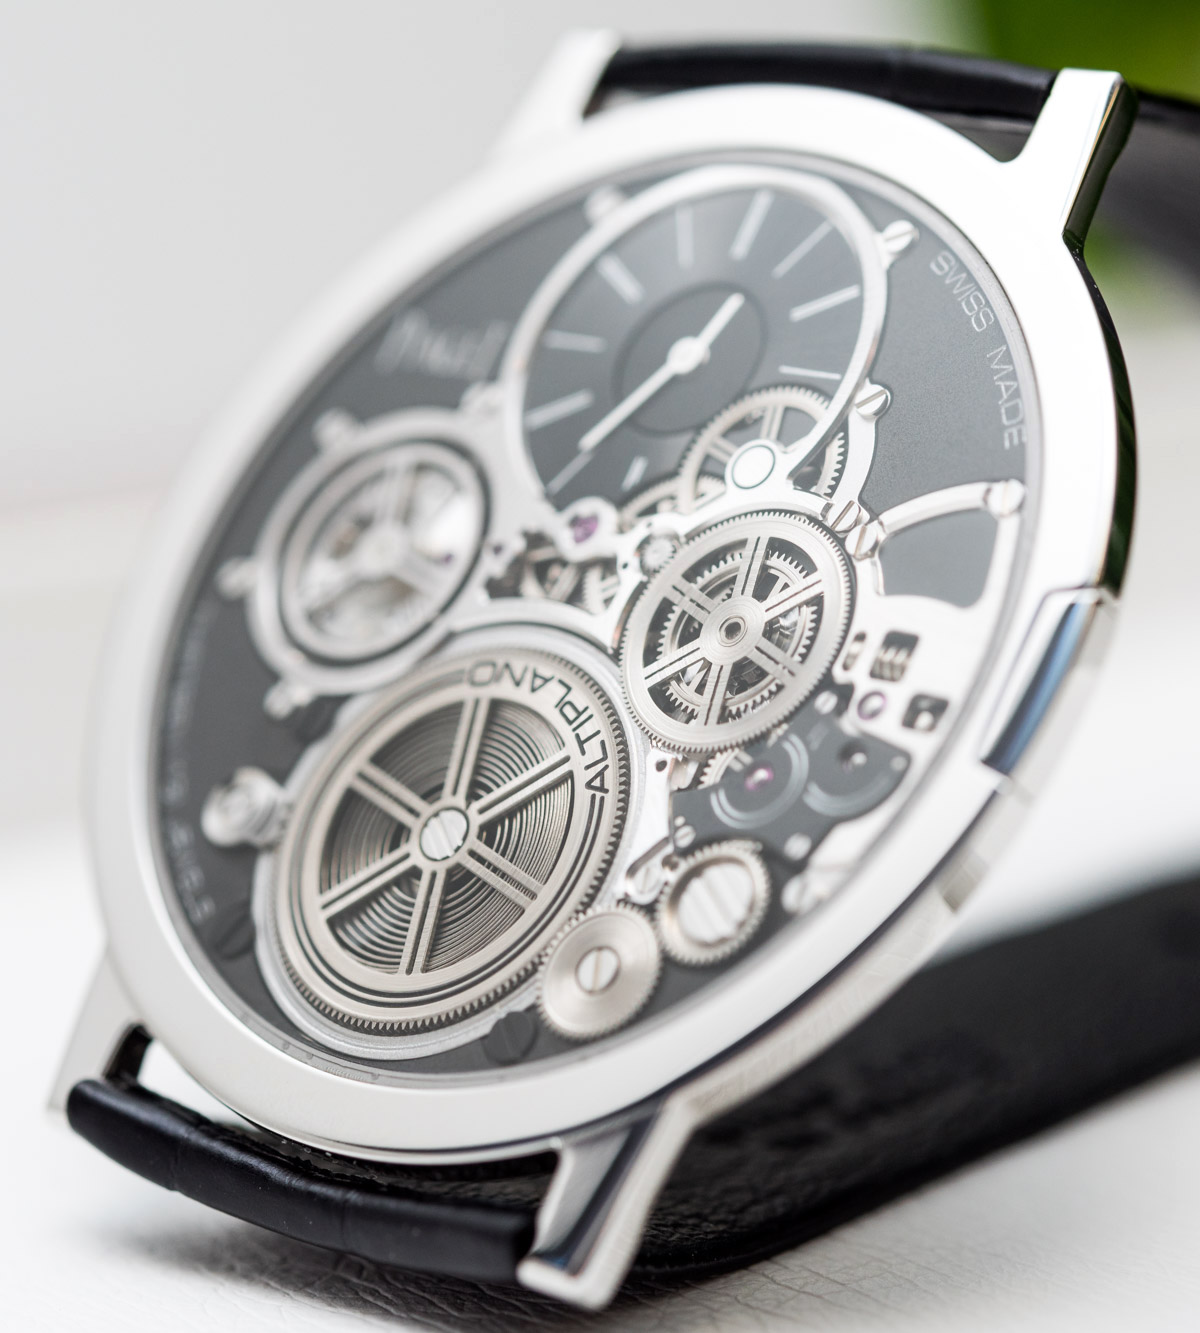 Piaget-Altiplano-Ultimate-Concept-Ultra-Thin-Record-Skeleton-Movement-aBlogtoWatch-10.jpg